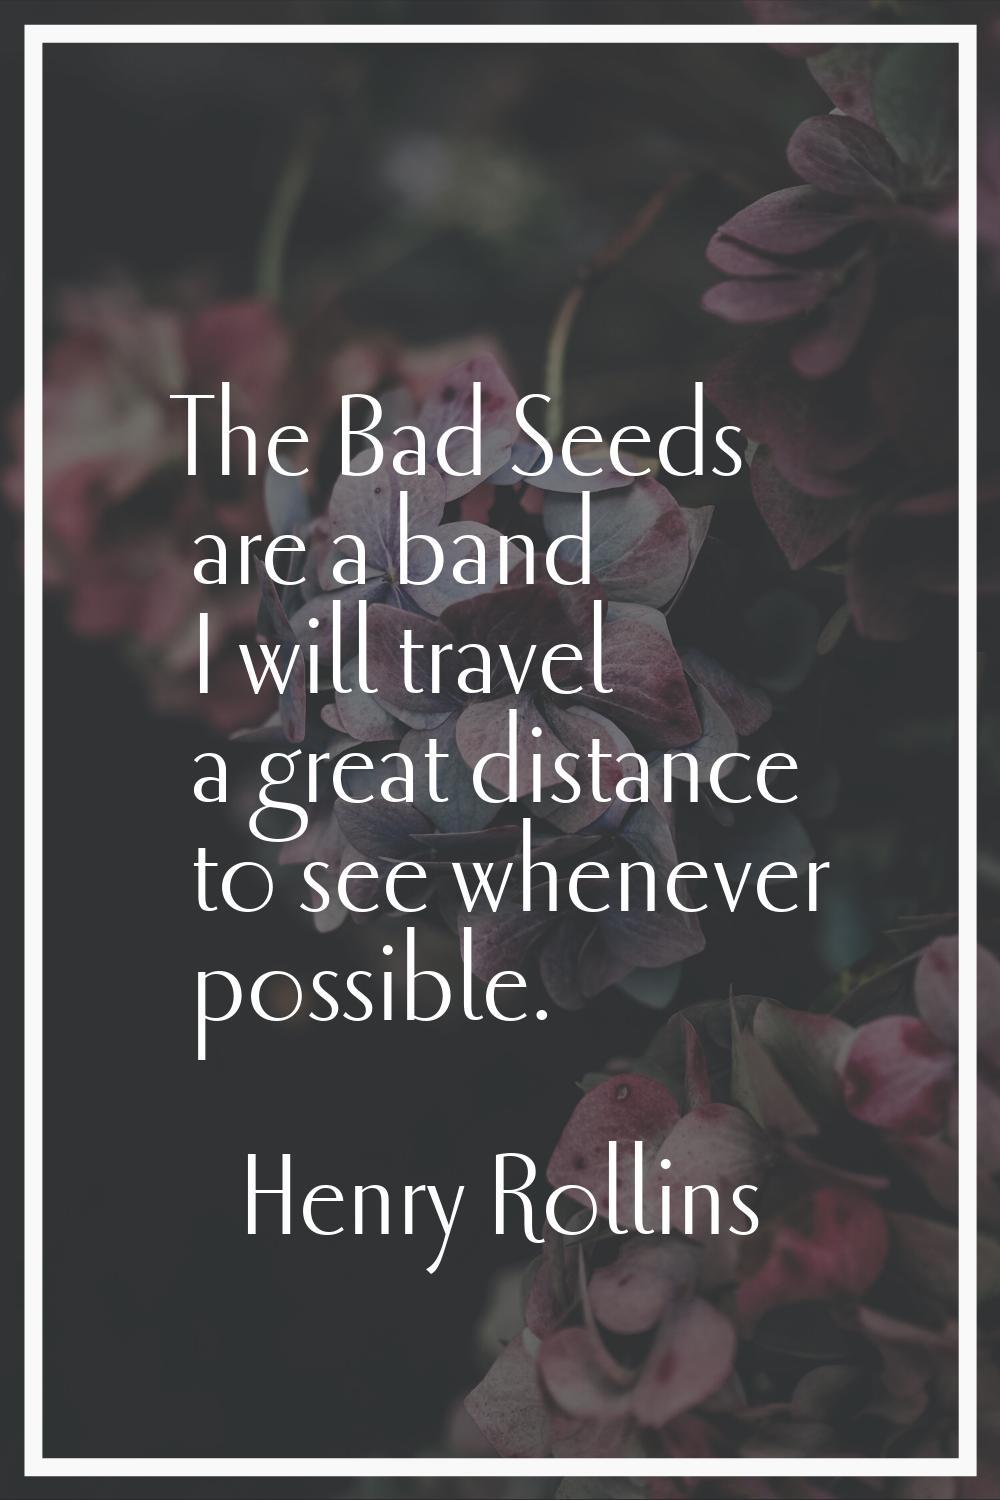 The Bad Seeds are a band I will travel a great distance to see whenever possible.